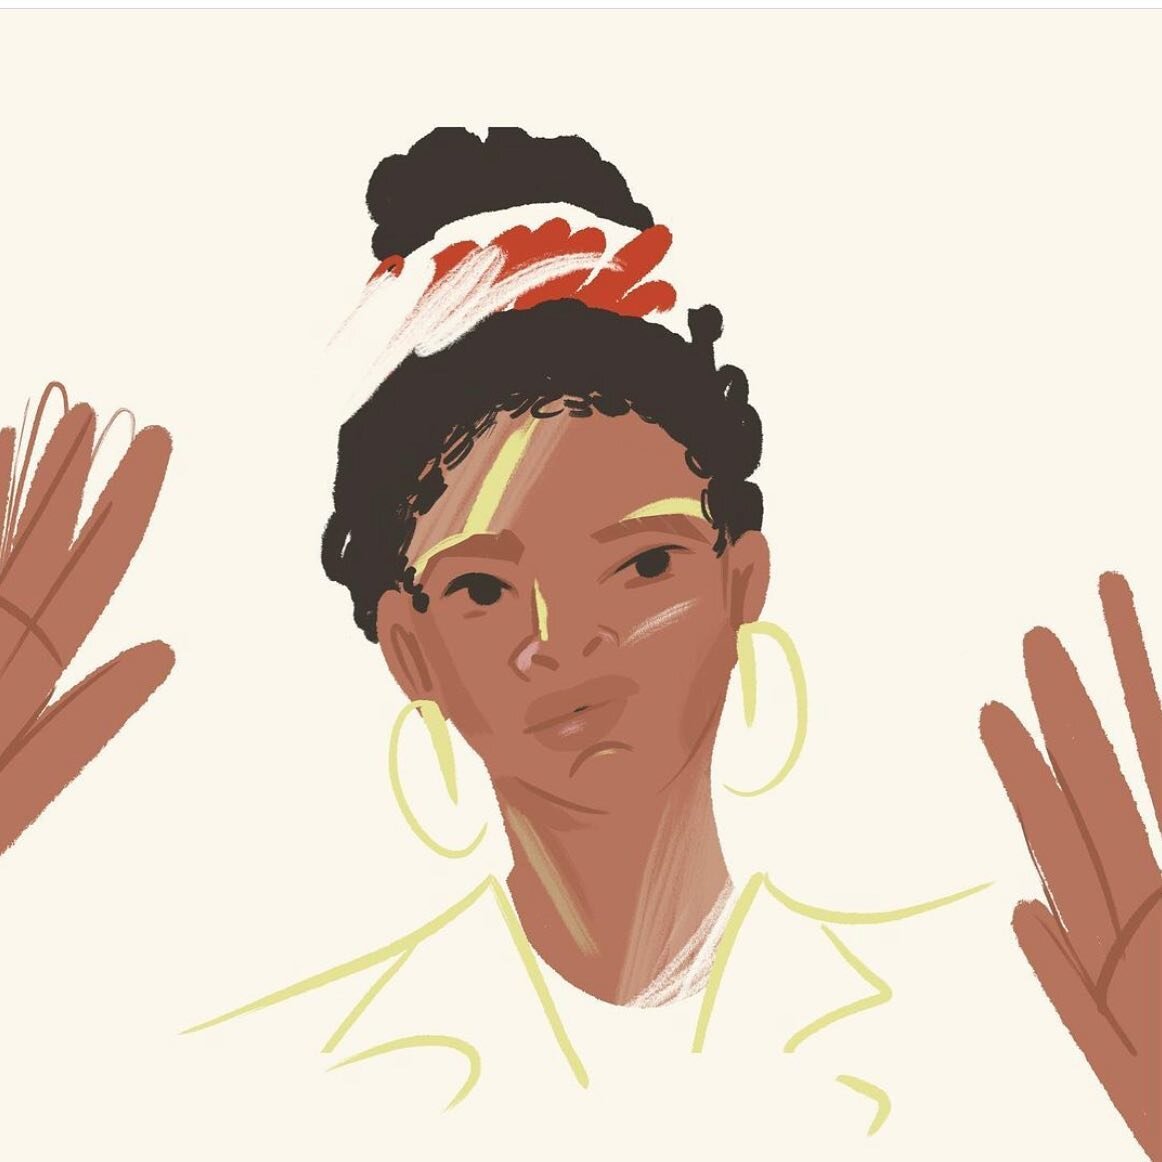 As you know, February is black history month. The annual celebration of achievements by African Americans and a time for recognizing their central role in U.S. history. My sister/friend @katyyyhall created a Black History Month Activity Grid. The lin